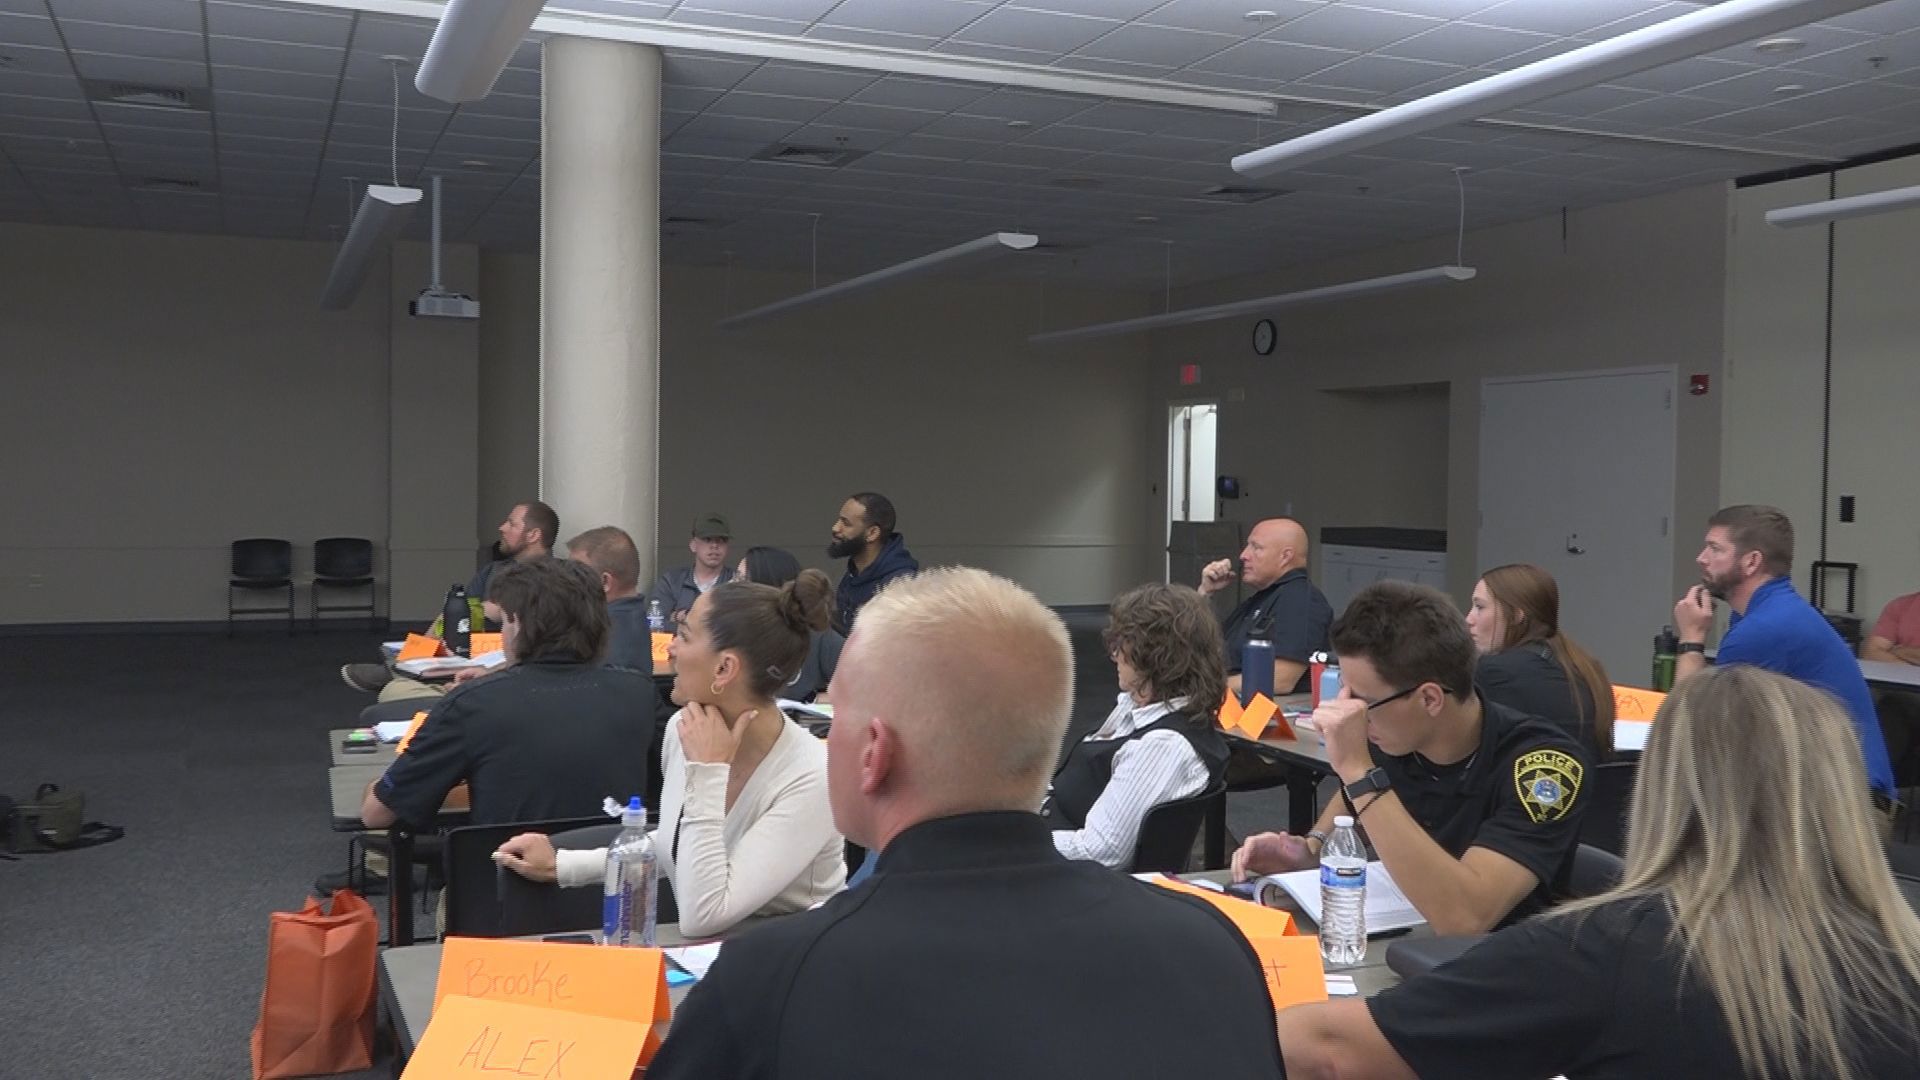 Training provided Wednesday will help police and other public-facing professionals make better decisions when encountering someone with a mental health crisis.